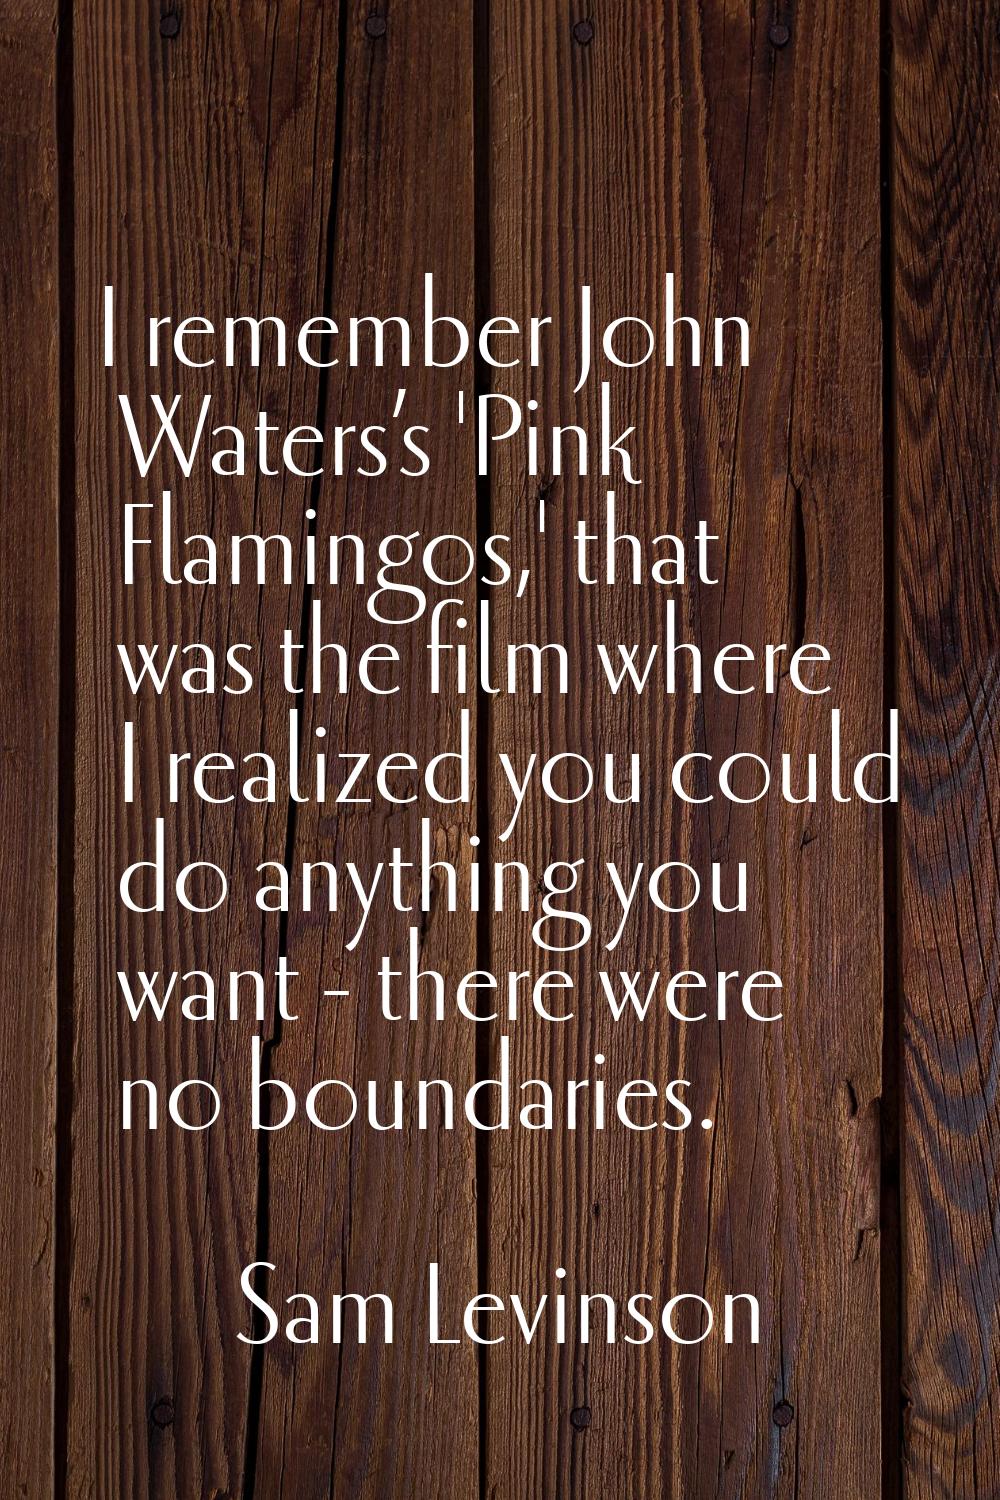 I remember John Waters’s 'Pink Flamingos,' that was the film where I realized you could do anything